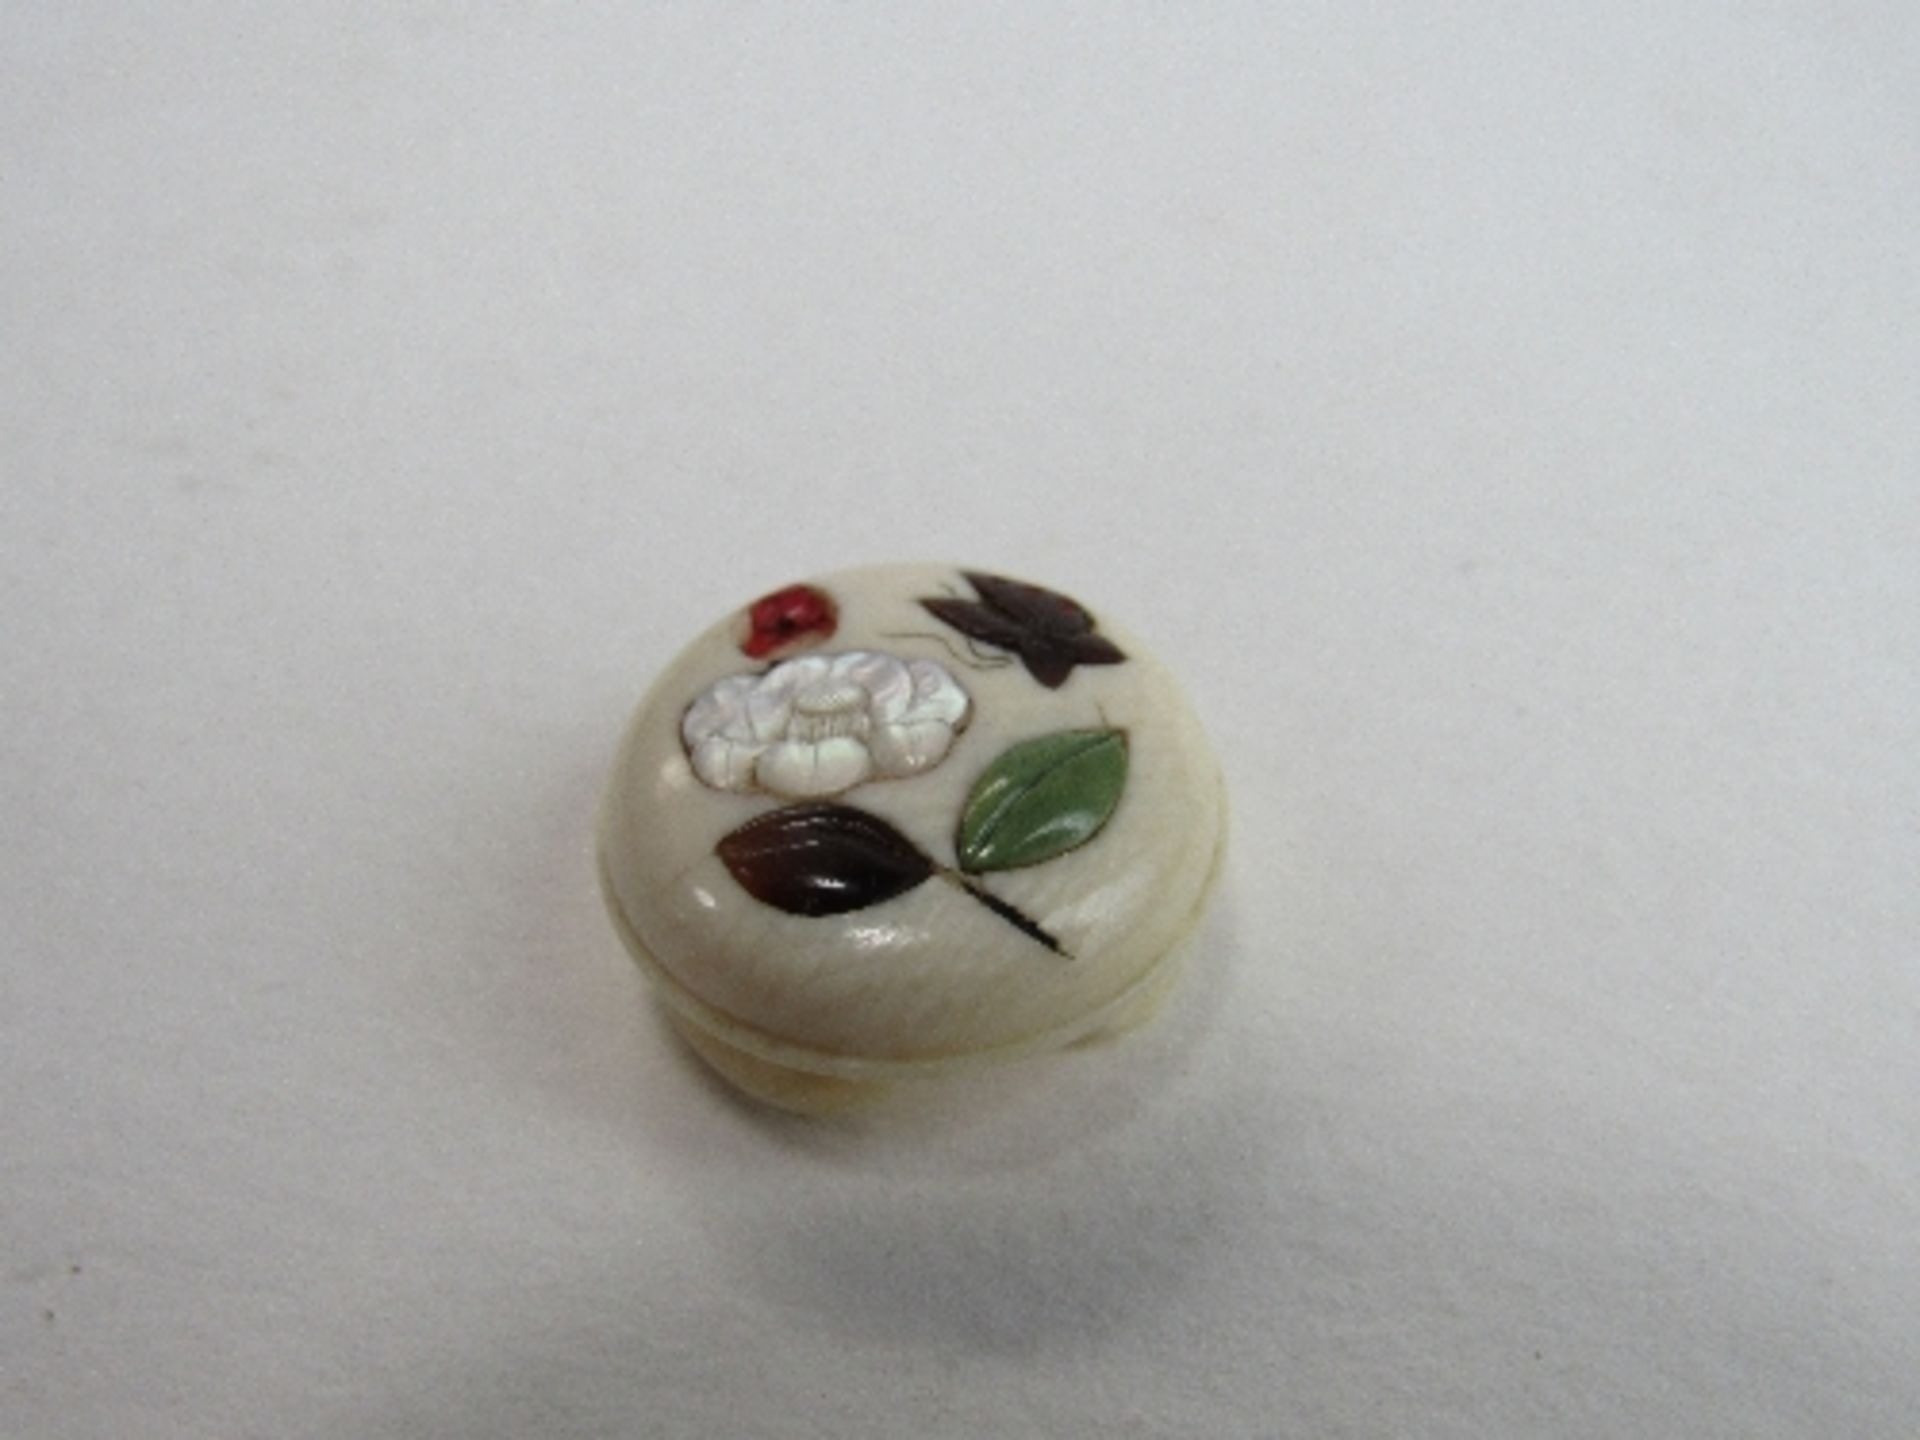 Circular ivory button decorated with mother of pearl & stone inlay of flowers & insects (1 flower